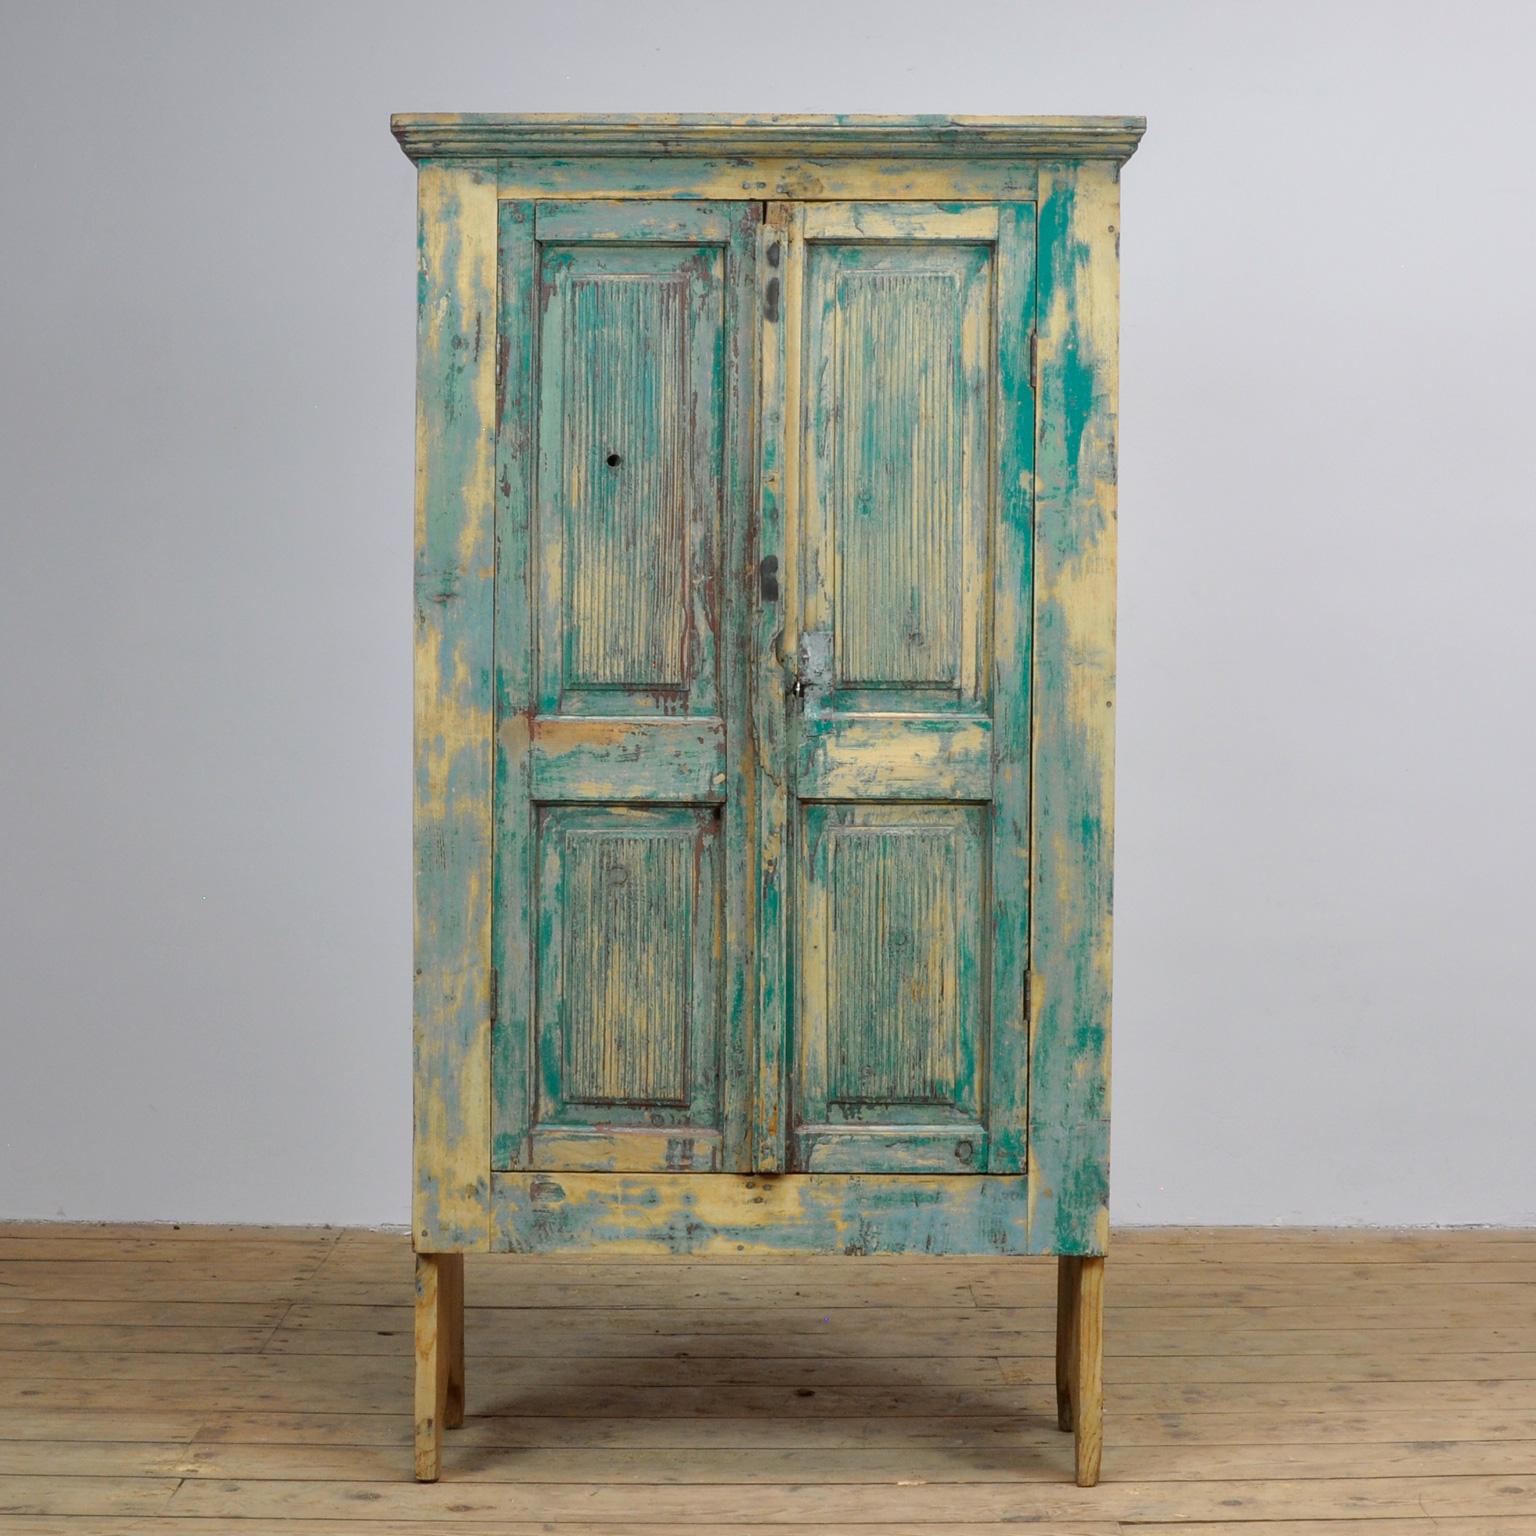 Pine cupboard from Moldova. Made circa 1910. Beautiful patina created by the various color layers that have been applied to it over the years.